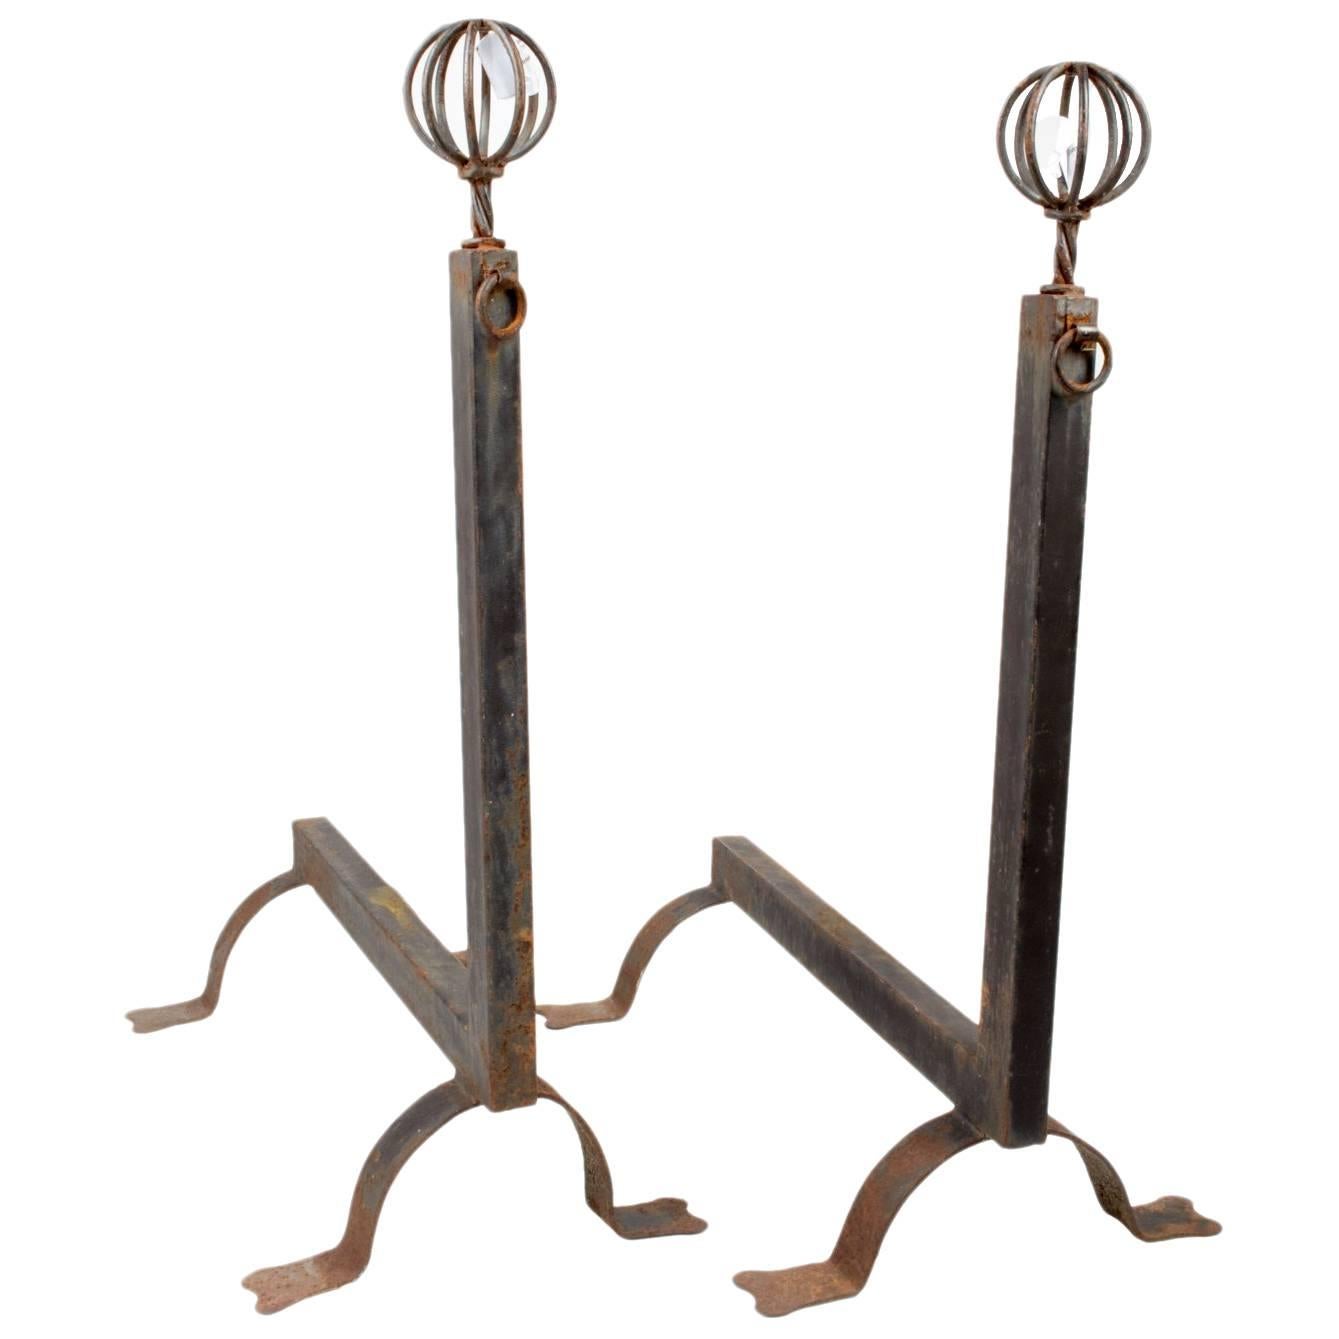 Antique French Ball and Ring Tall Andiron, Pair